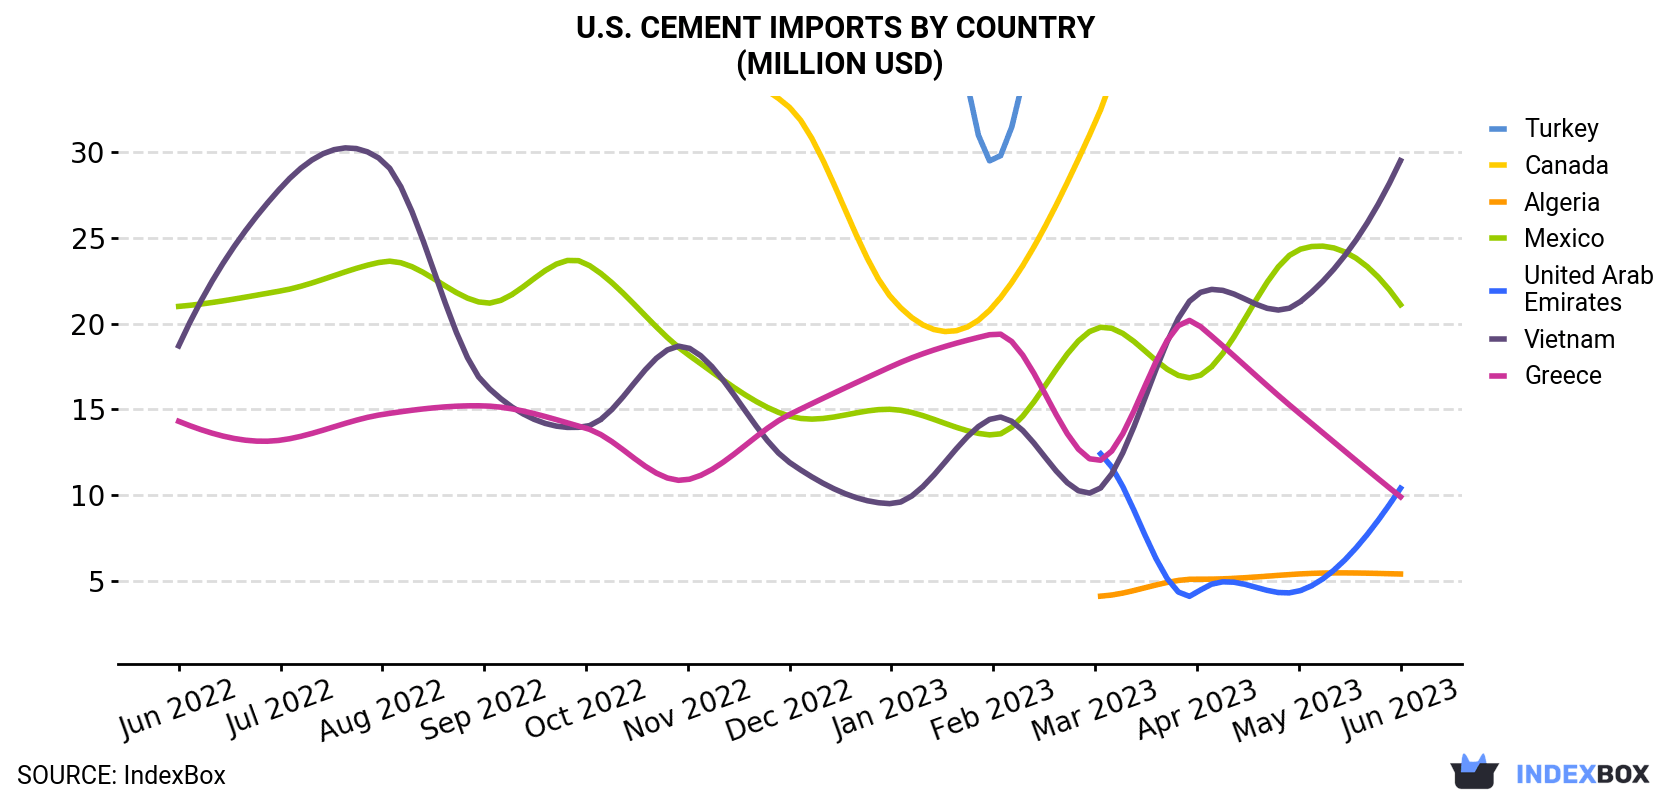 U.S. Cement Imports By Country (Million USD)